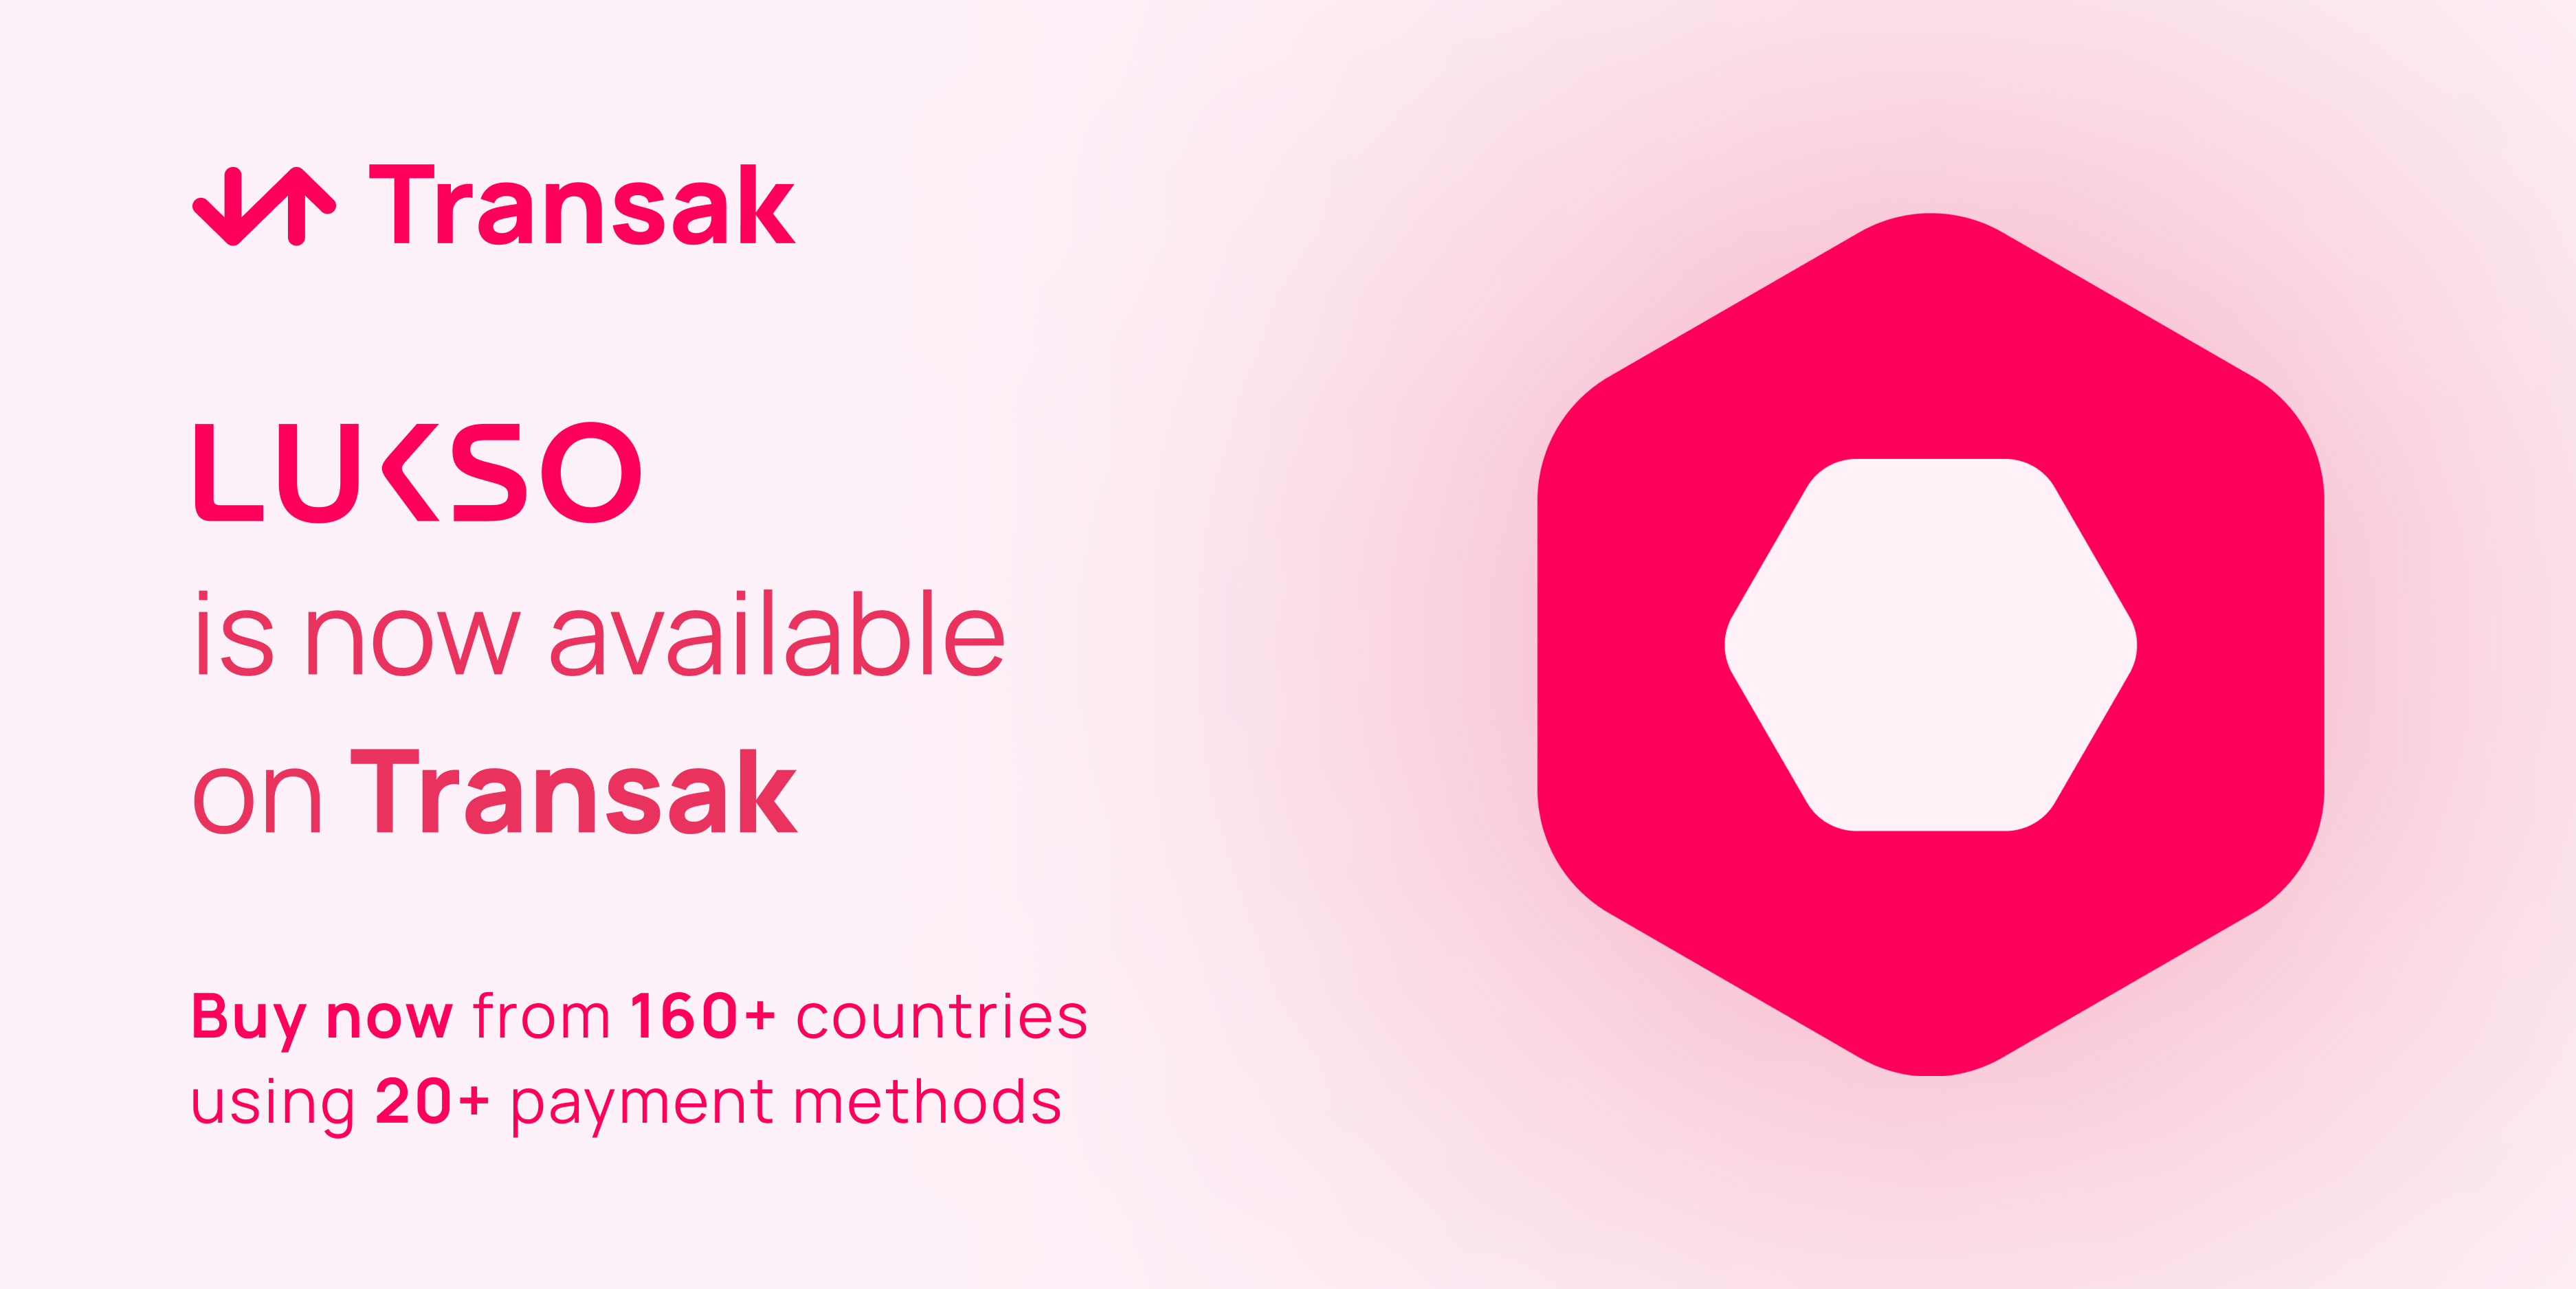 Transak and LUKSO partnership announcement: A graphic showing the Transak and LUKSO logos side by side, symbolizing their strategic collaboration to revolutionize the creative economies in the blockchain world.